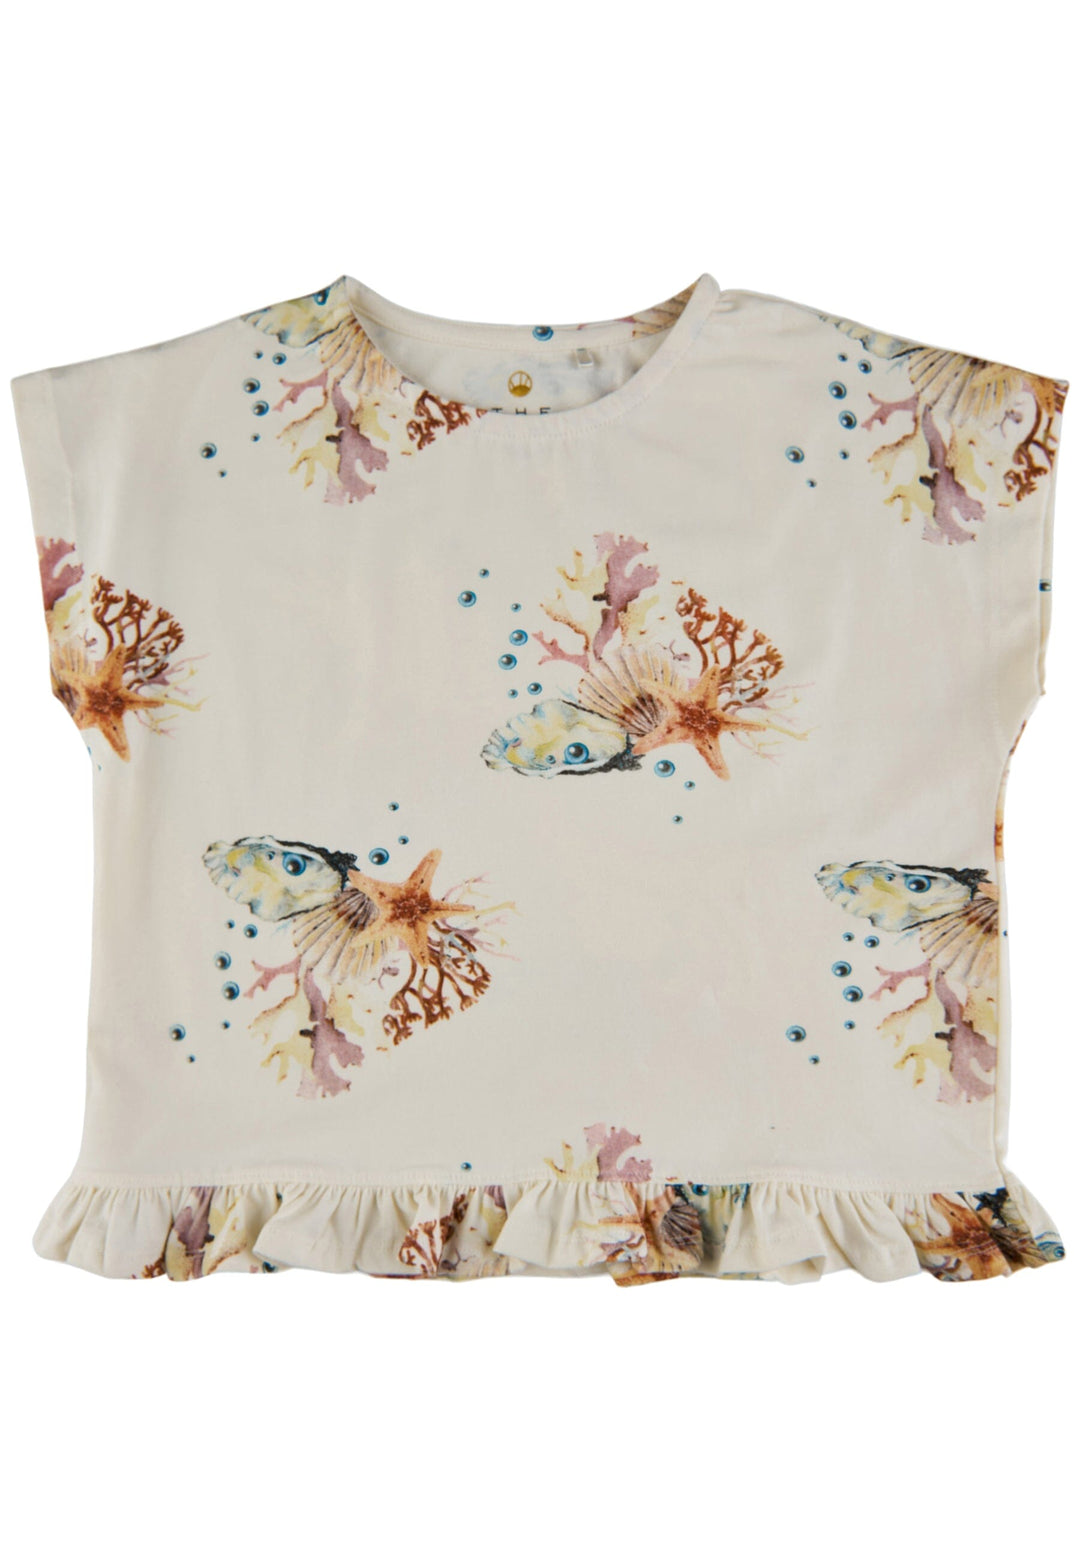 The New - Tngiselle Os S_S Tee - White Swan Coral Aop 